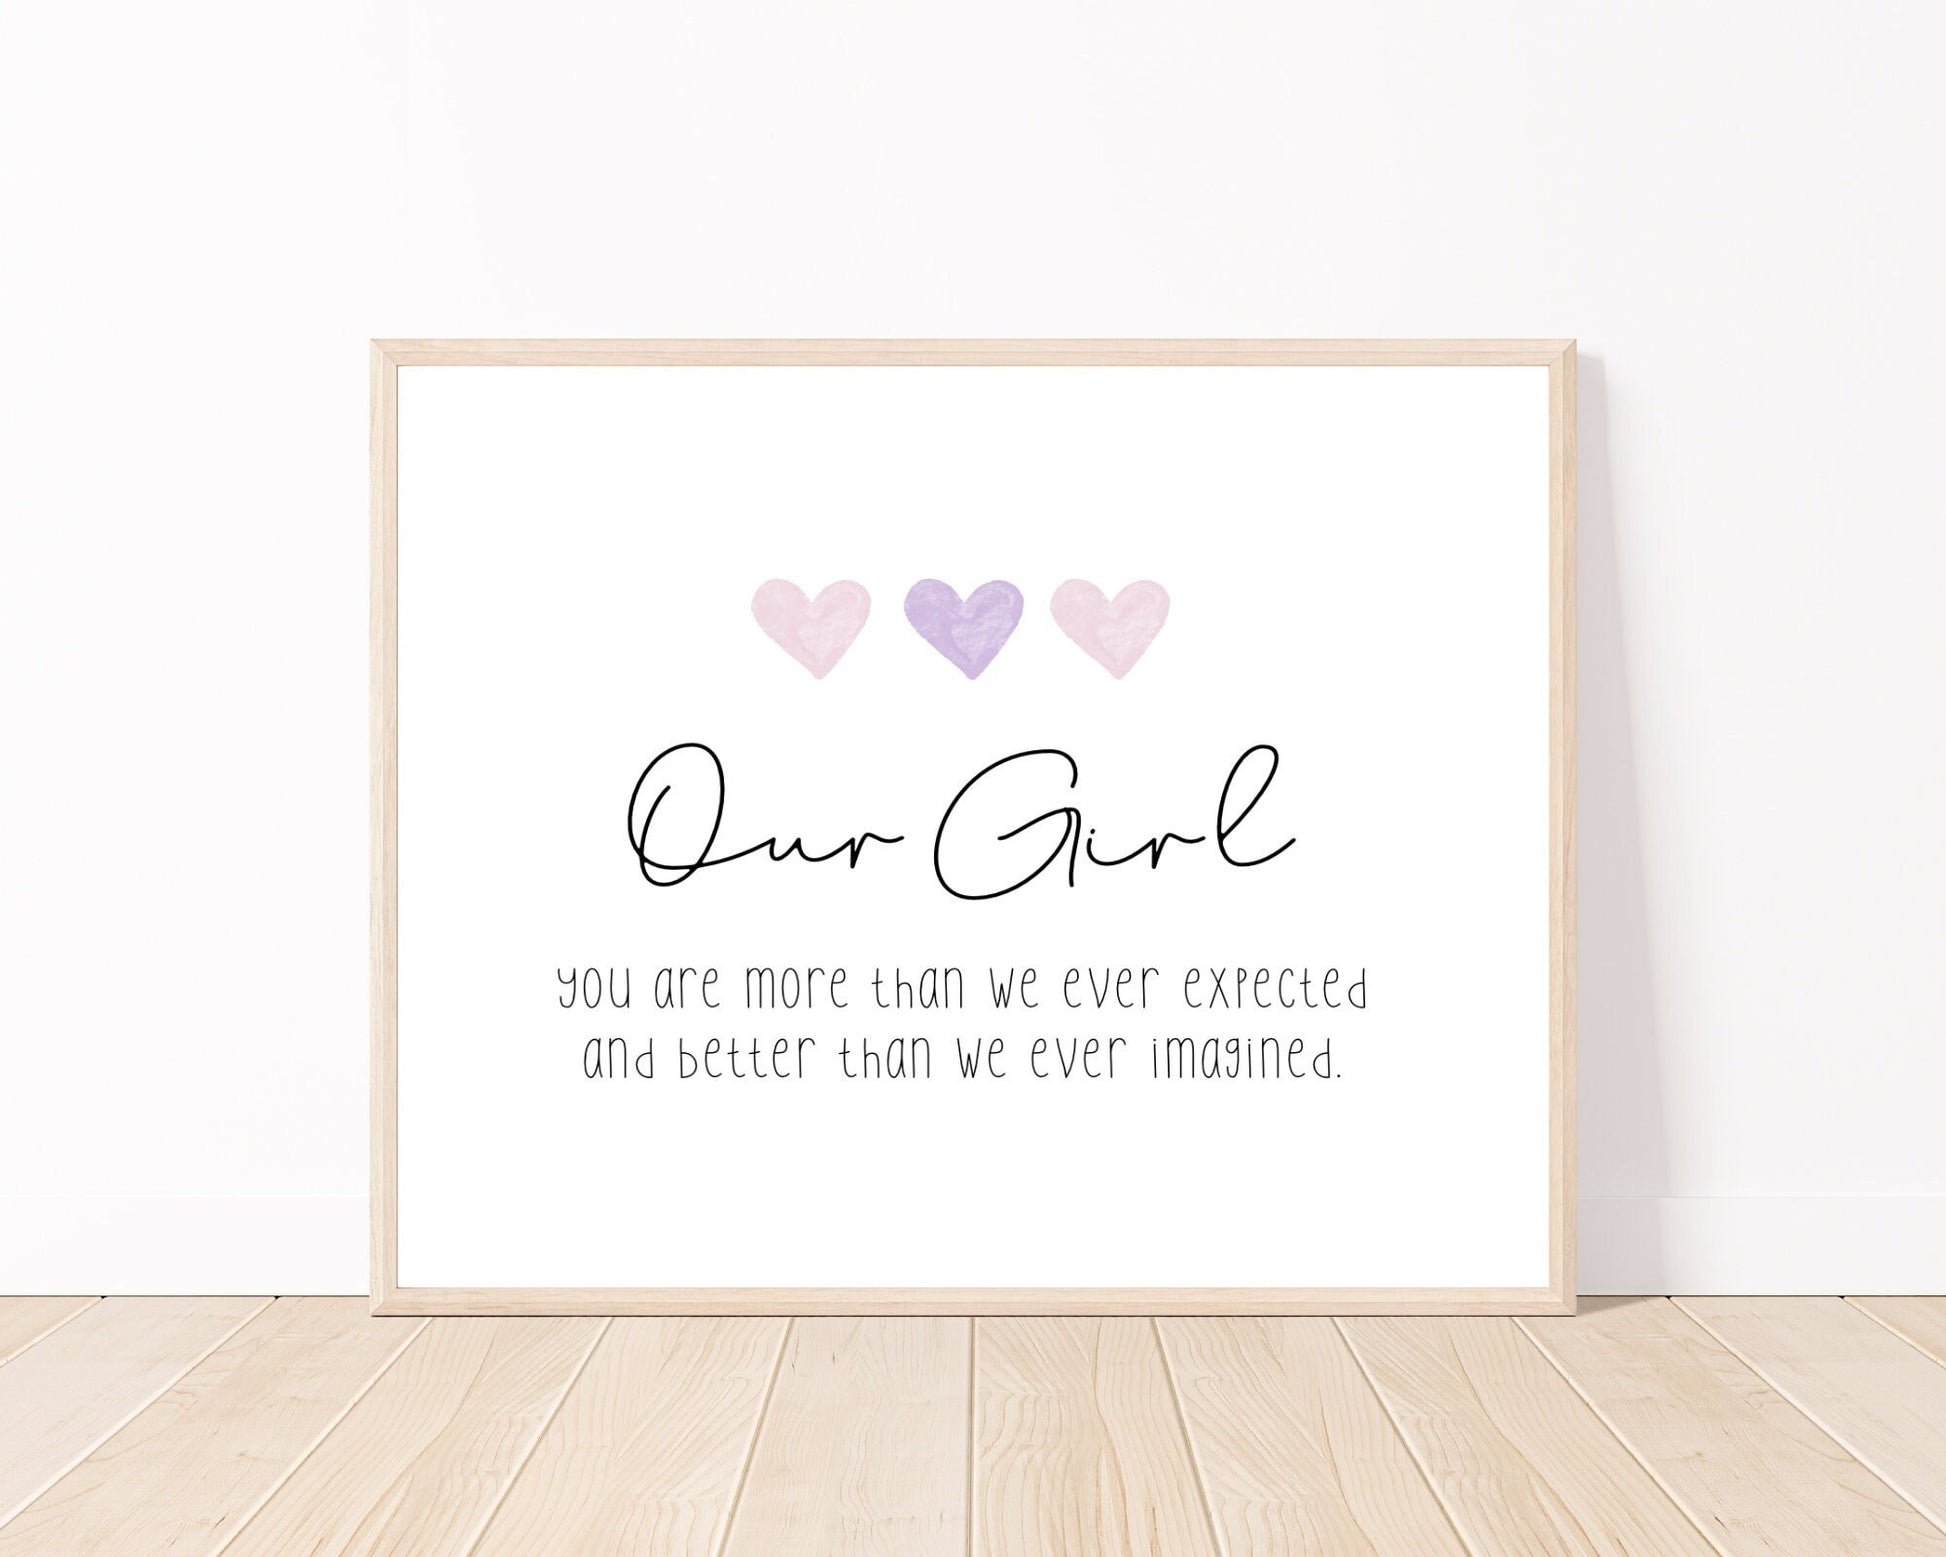 A little girl’s room digital print placed on a white wall and parquet flooring that has three hearts at the top, and a piece of writing that says: “Our girl, you are more than we ever expected and better than we ever imagined.”